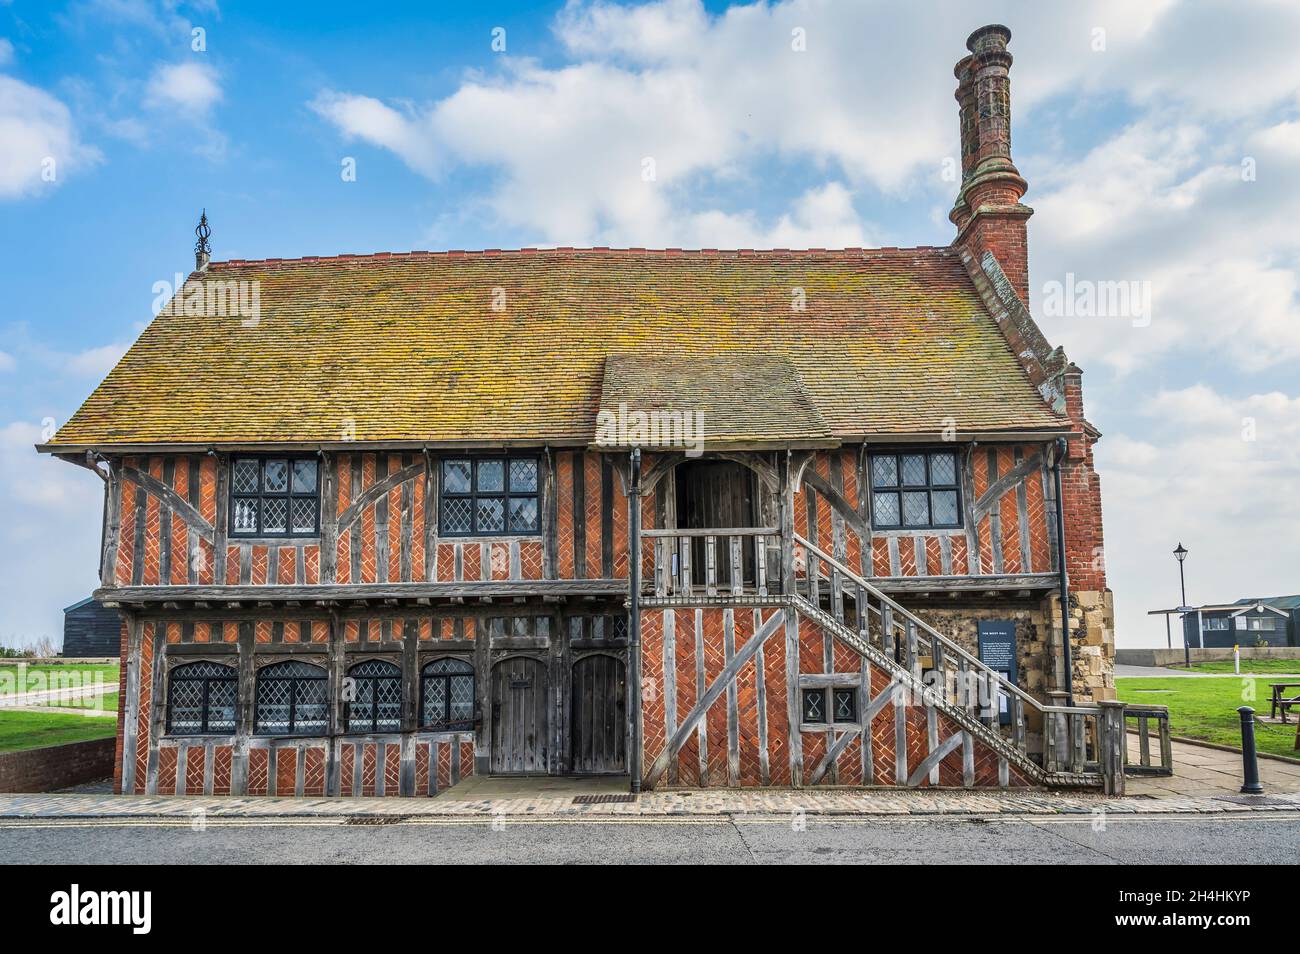 This medieval building is Moot Hall located on the promenade of the Suffolk Coast and historical resort town of Aldeburgh, the town that time forgot Stock Photo